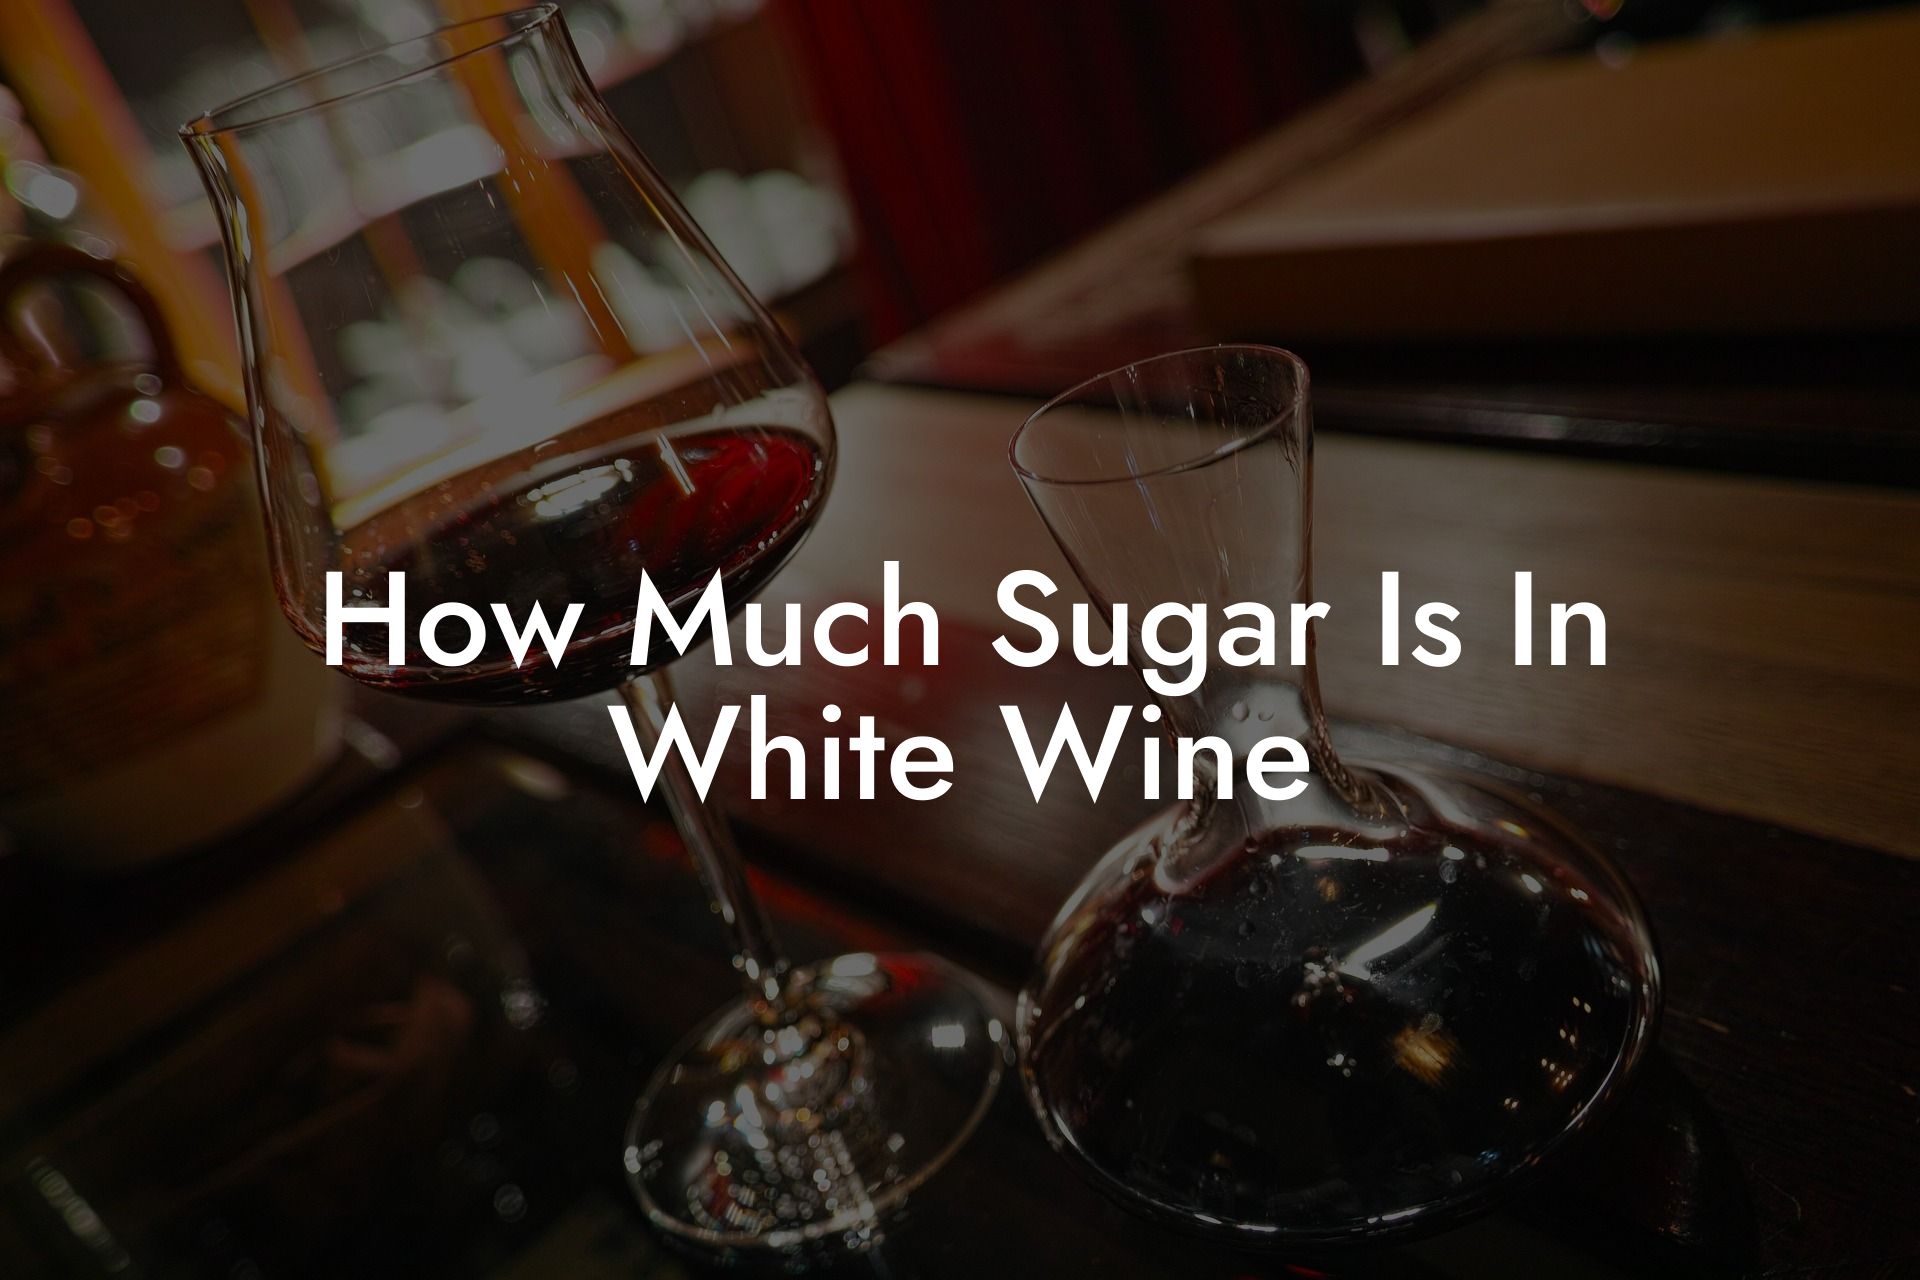 How Much Sugar Is In White Wine